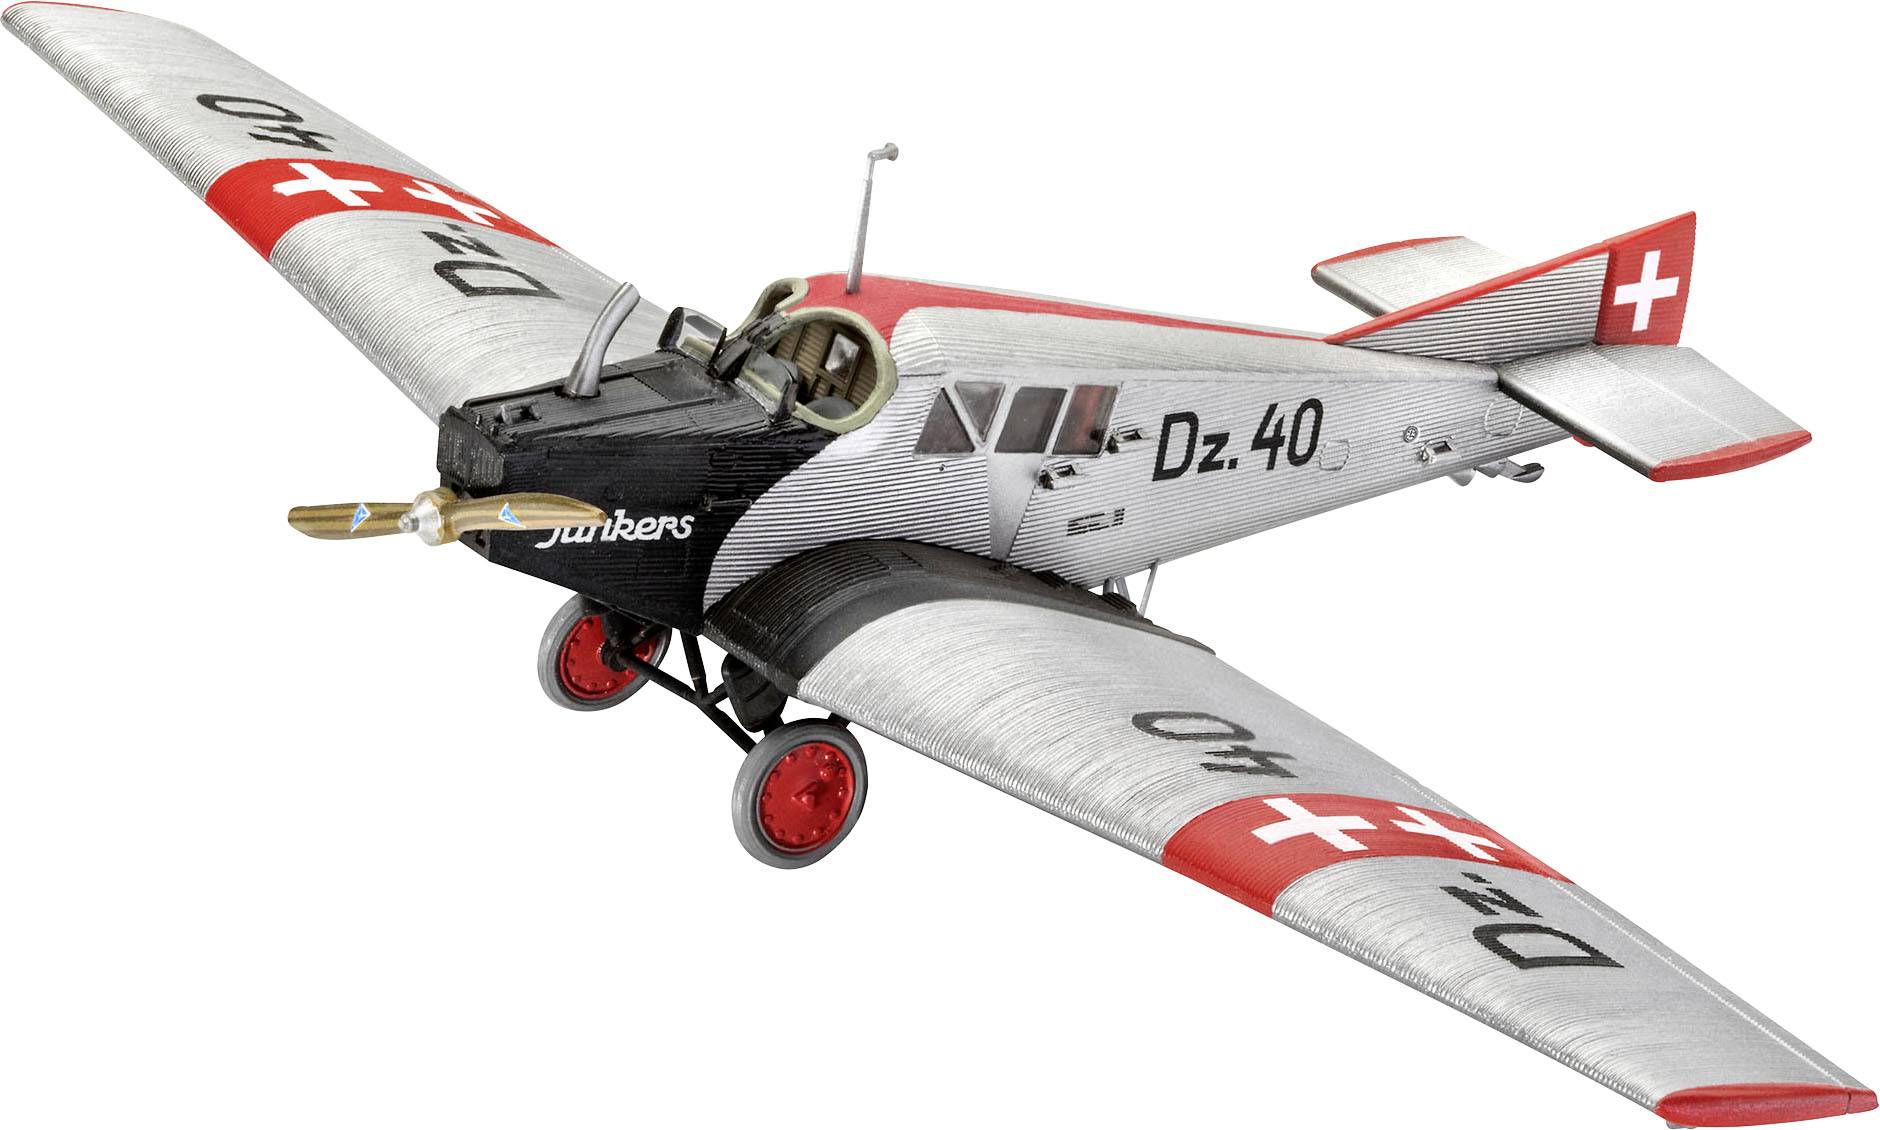 03870 REVELL Junkers F.13 Aircraft MODEL KIT 1:72 SCALE 